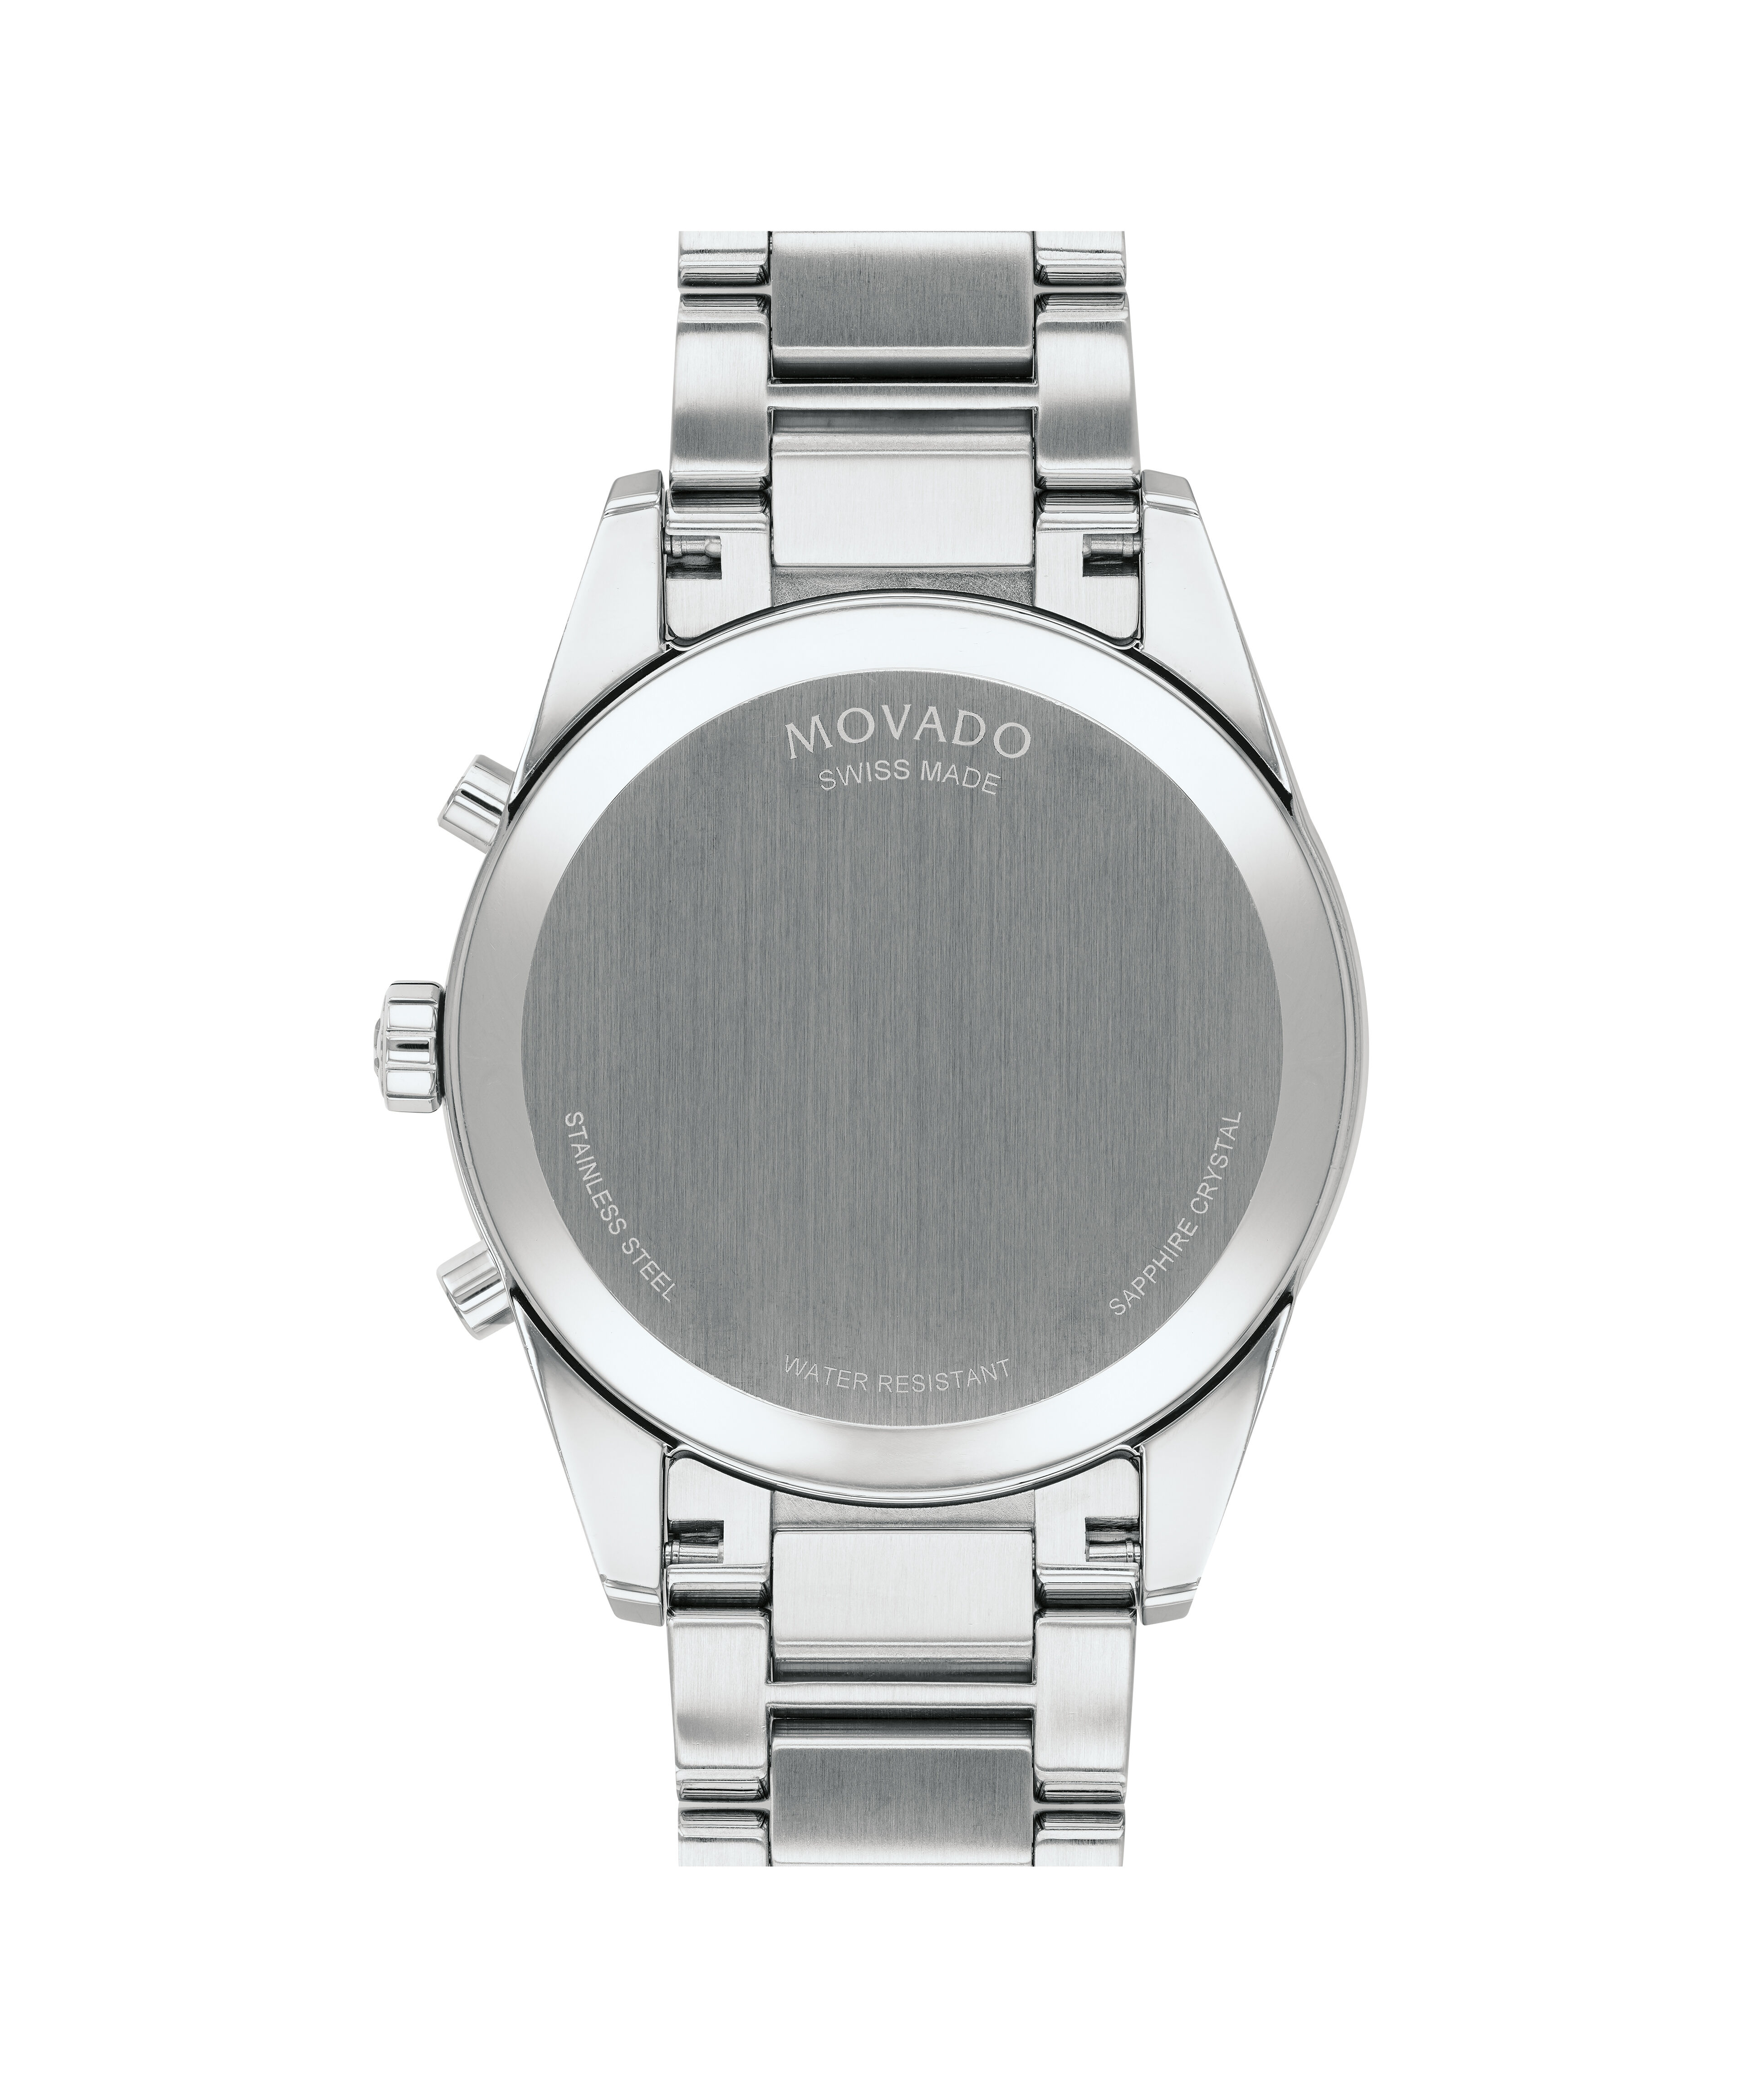 Movado 1930s Platinum Tank / Gondolo with Hooded Lugs and Diamonds